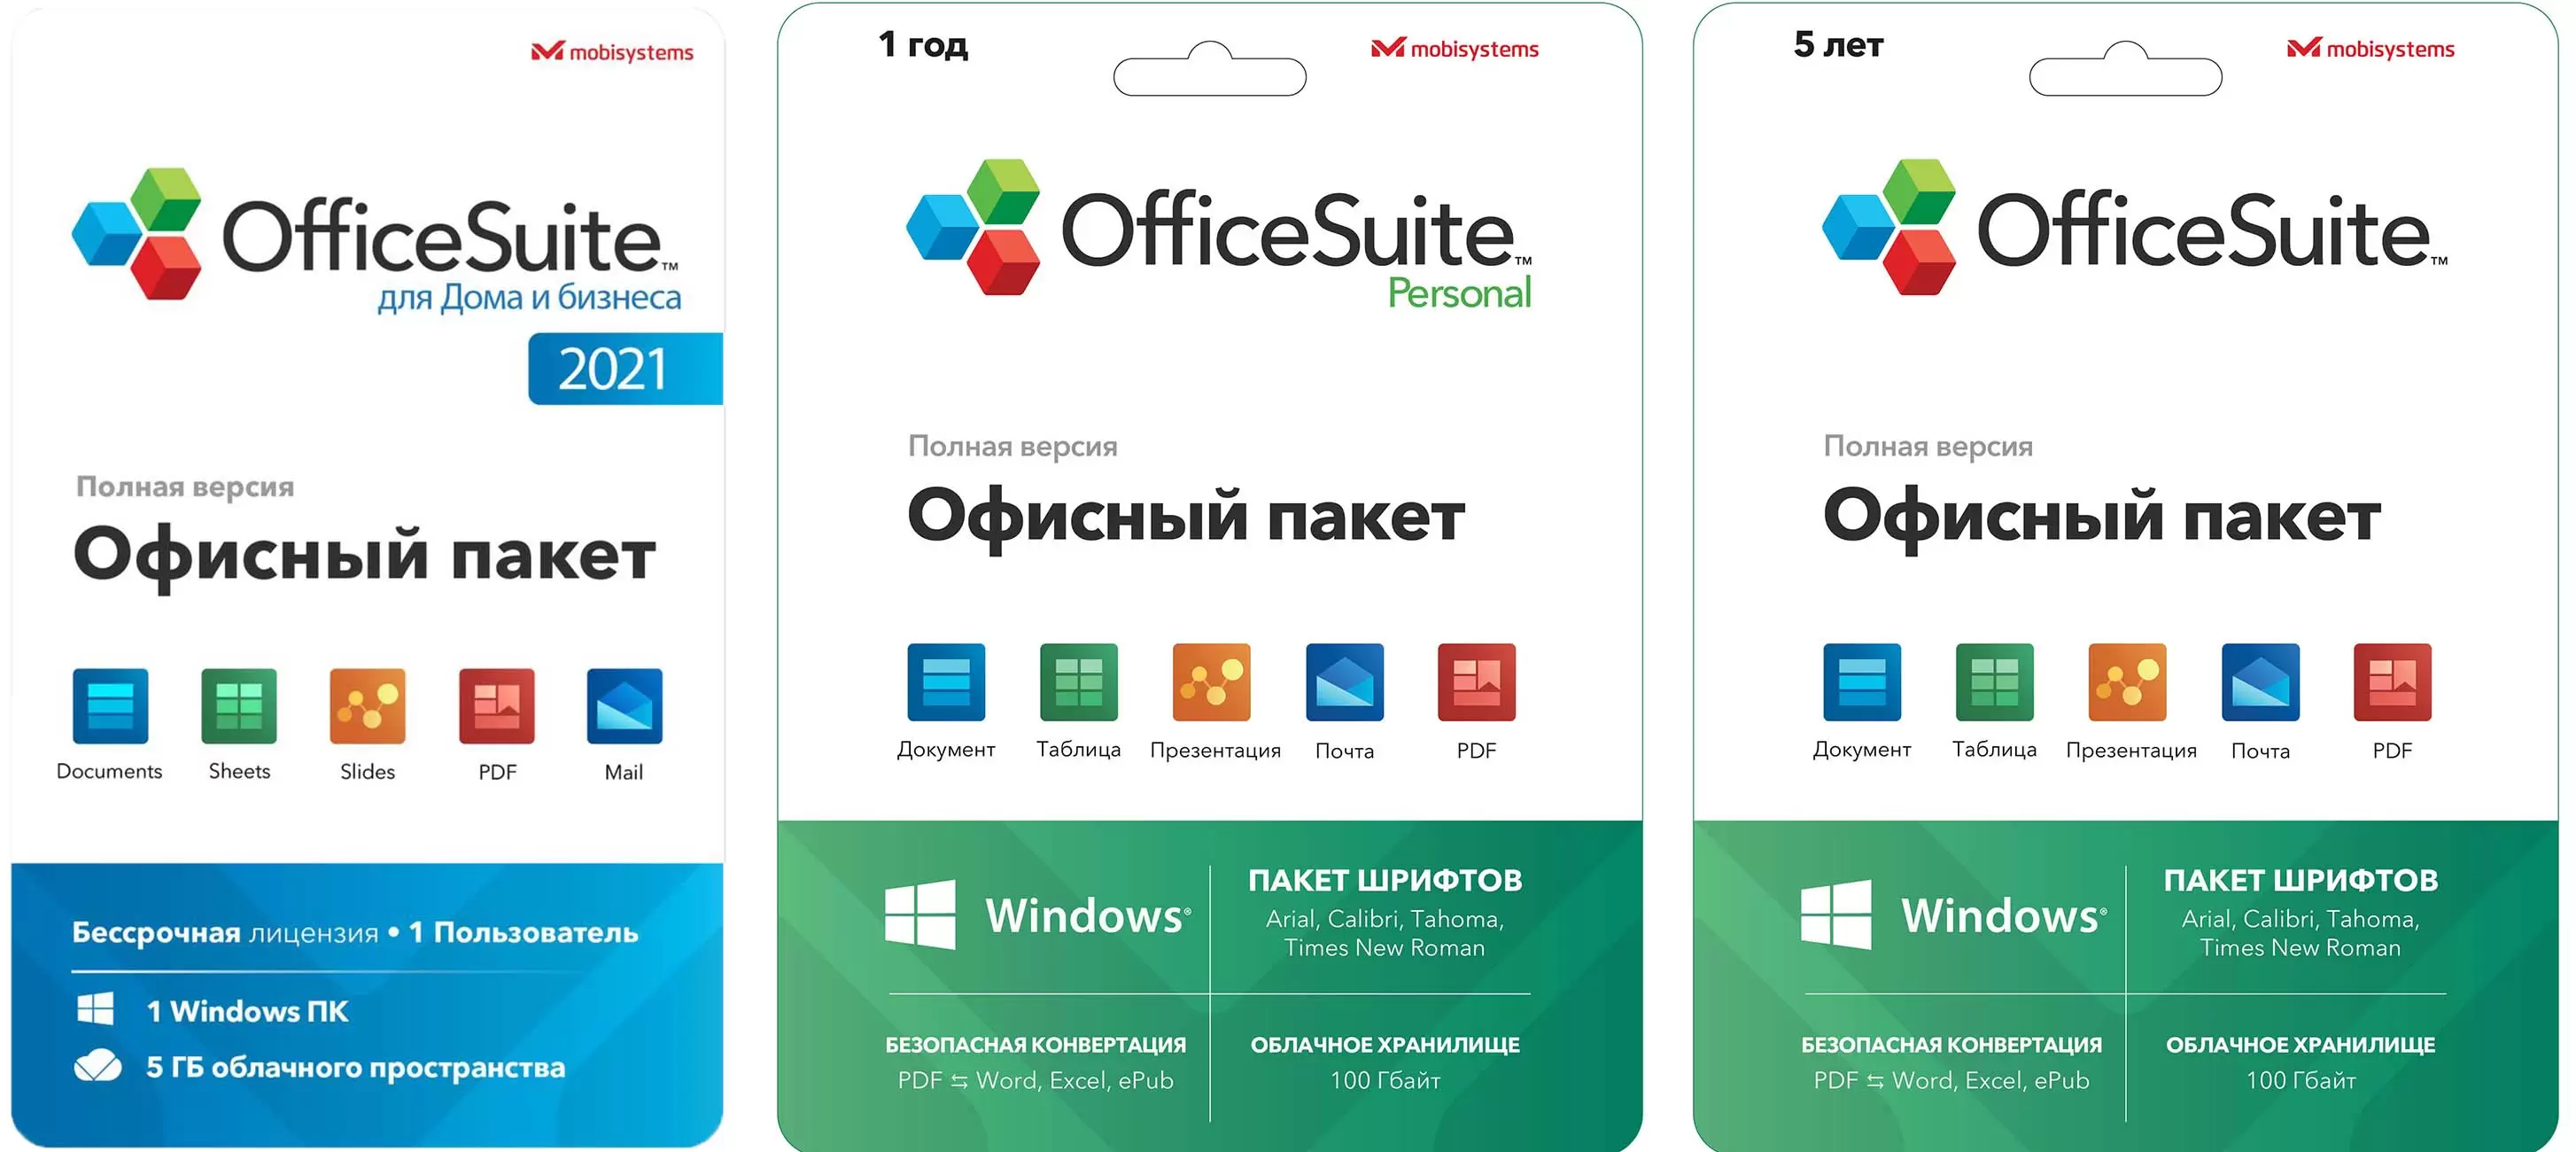 Home business 2021. OFFICESUITE Интерфейс. OFFICESUITE Windows. OFFICESUITE презентация. Mobisystems OFFICESUITE.